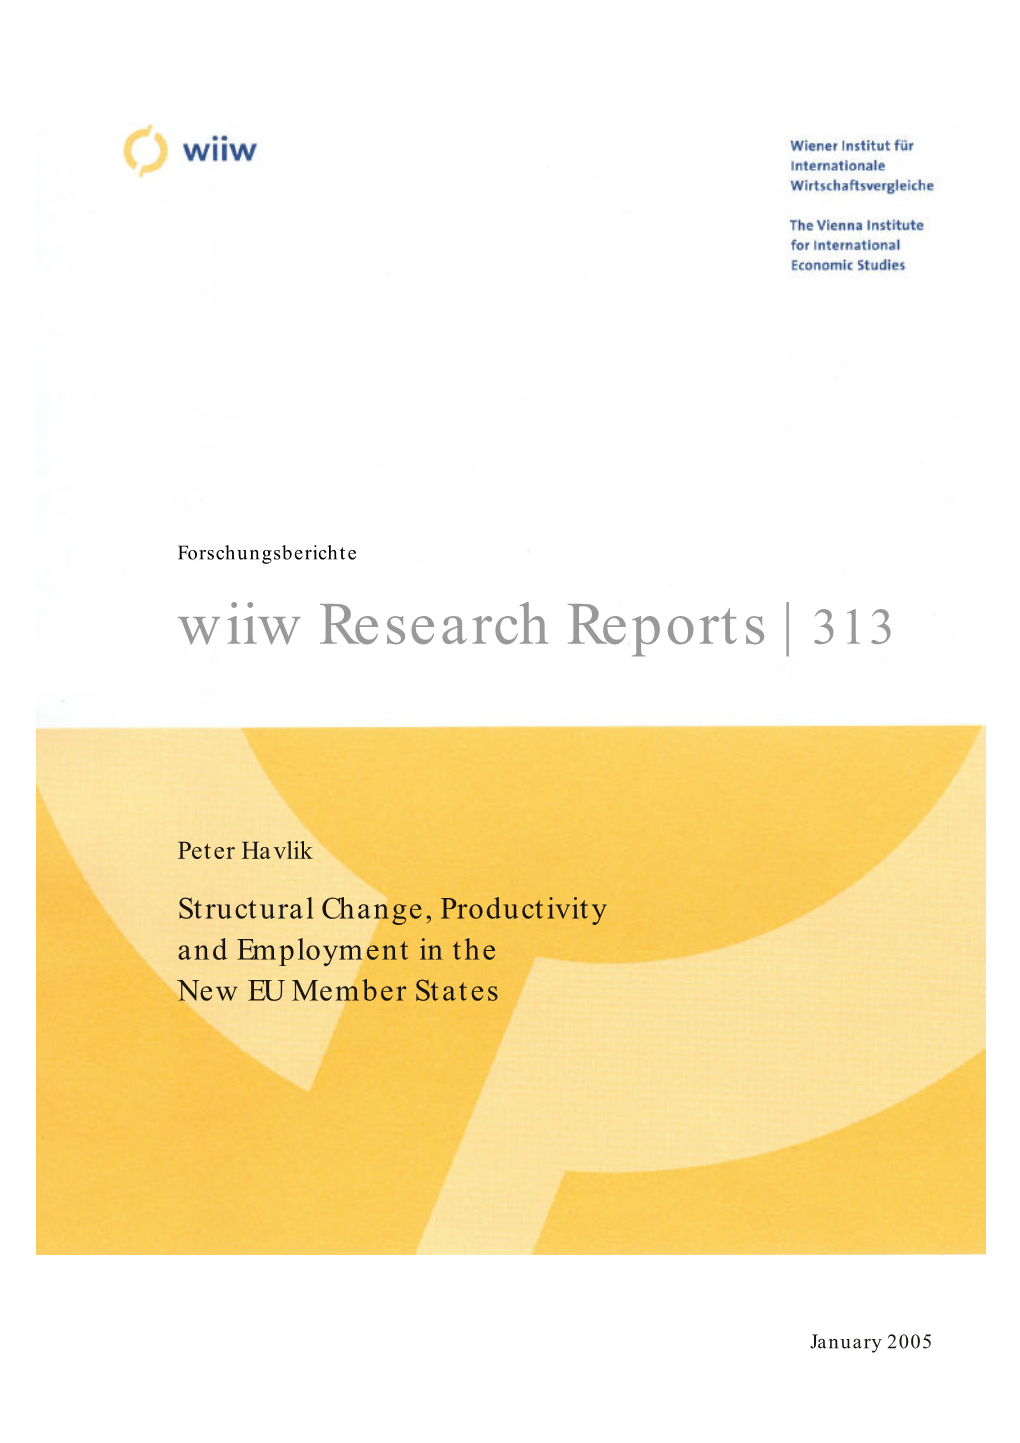 Structural Change, Productivity and Employment in the New EU Member States